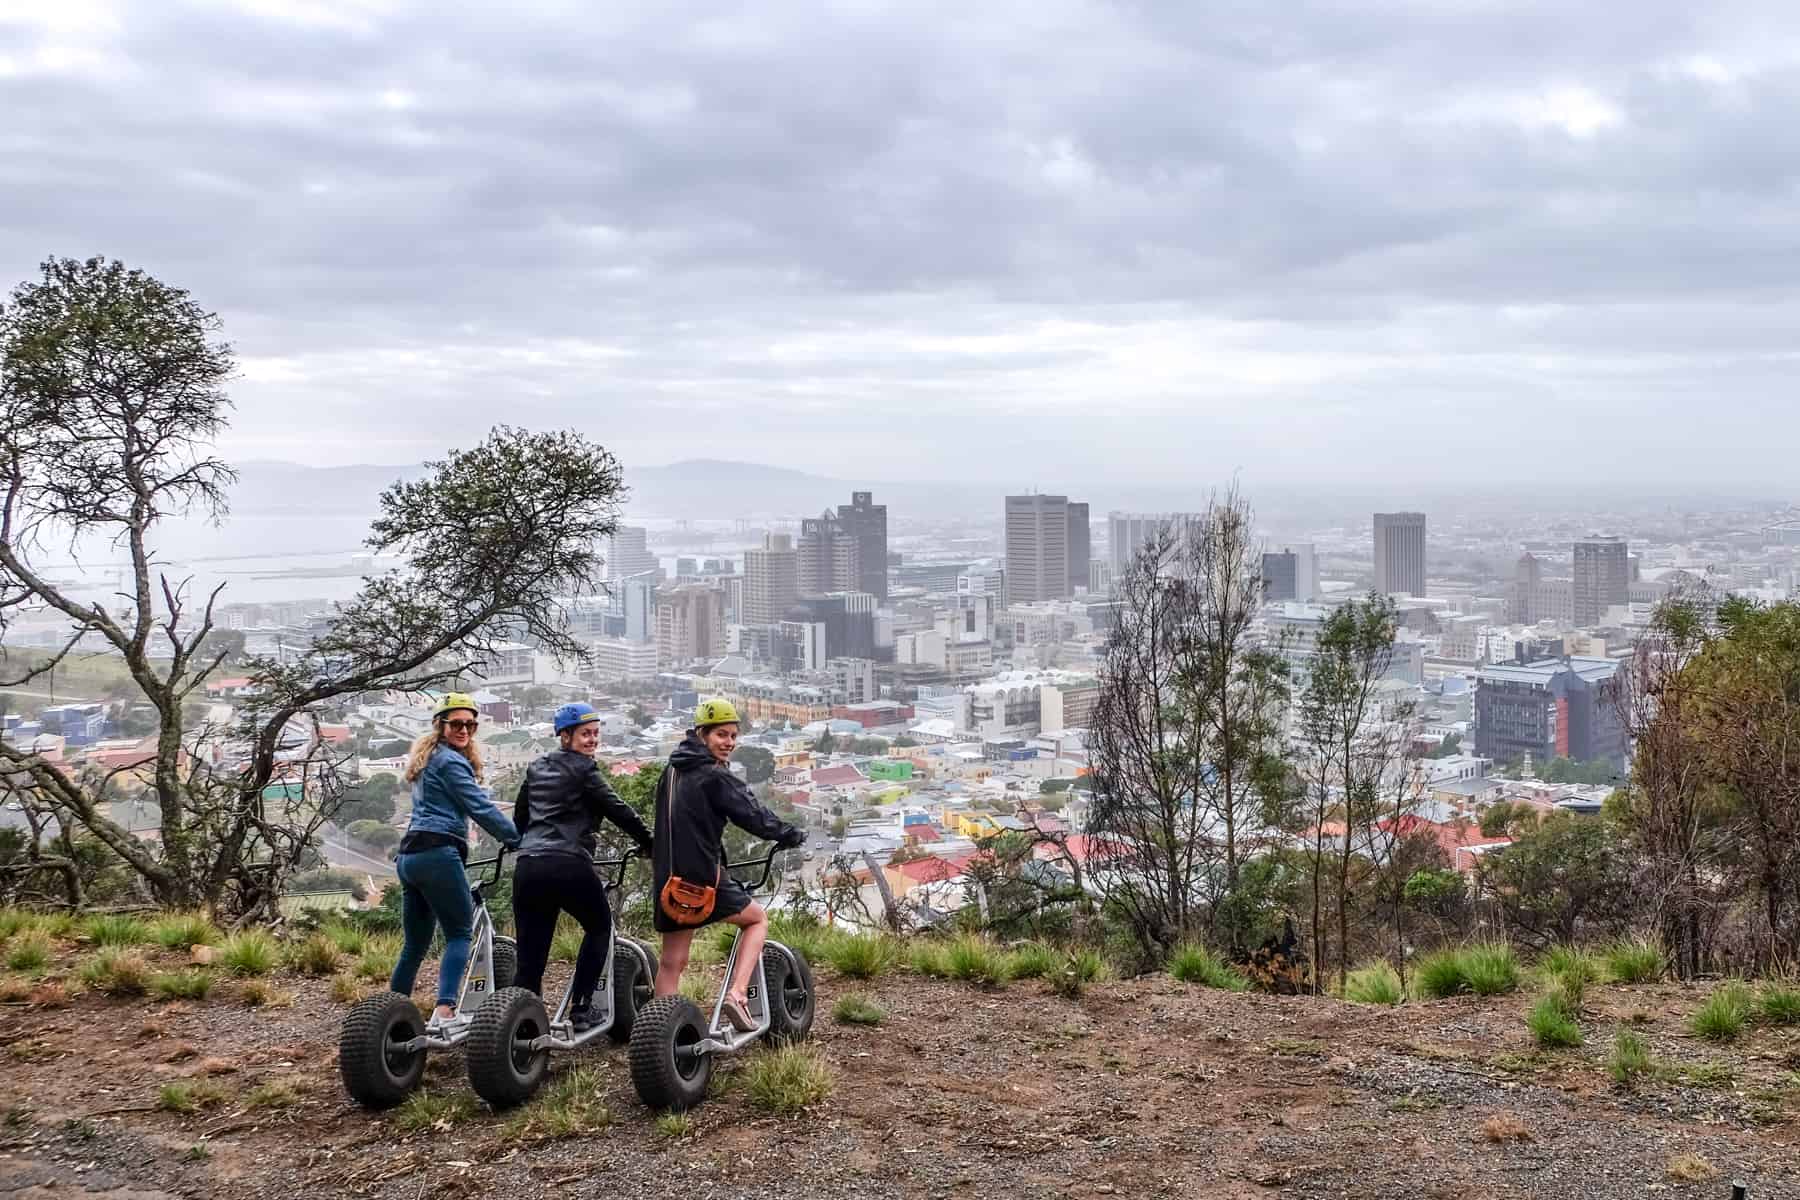 Three women on scooters look towards the camera. In front of them is the high rises and city spread of Cape Town, South Africa